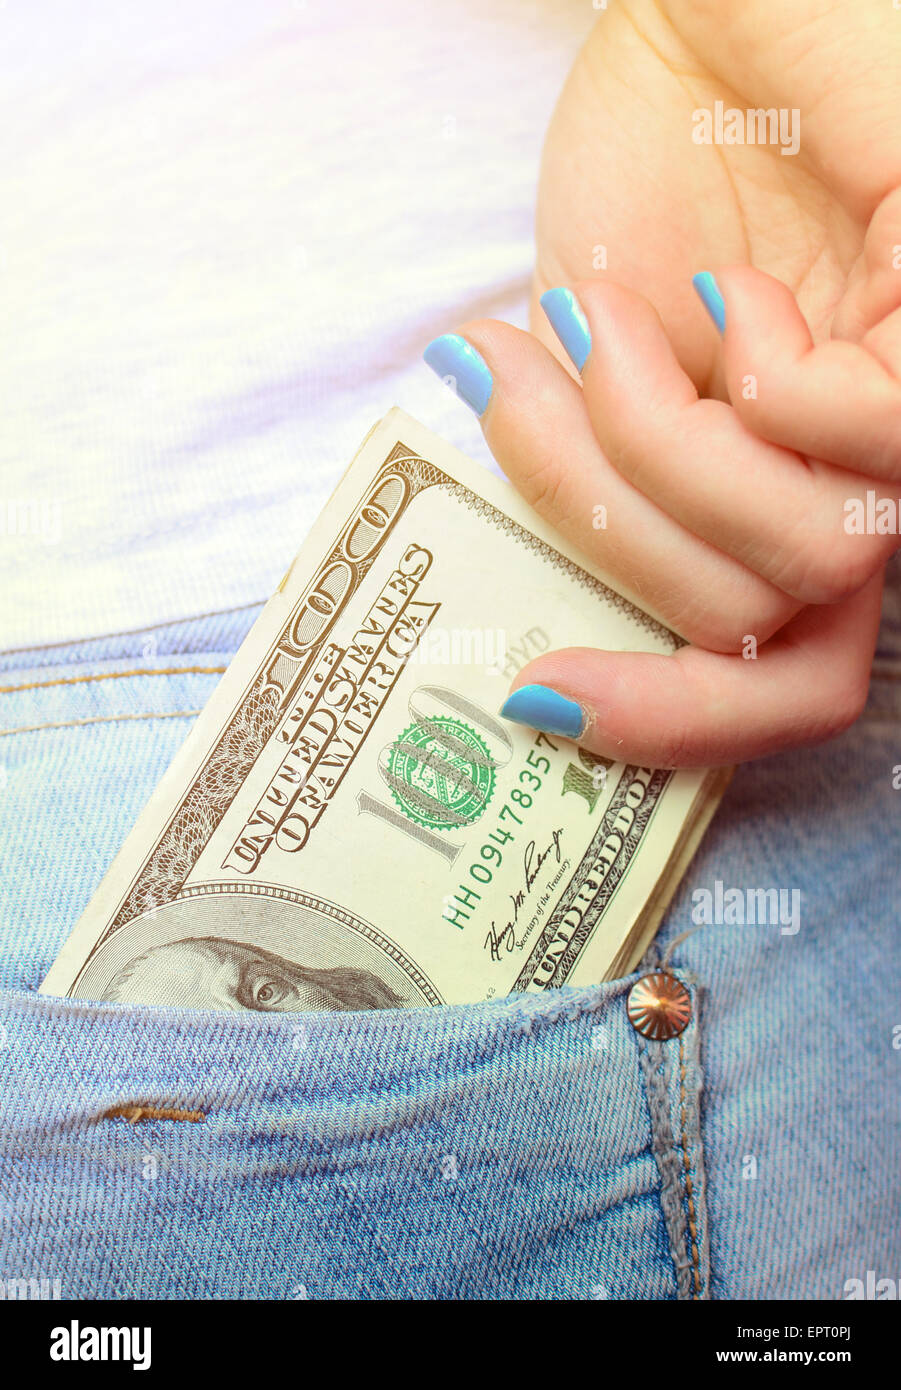 Woman hand taking money from jeans back pocket Stock Photo